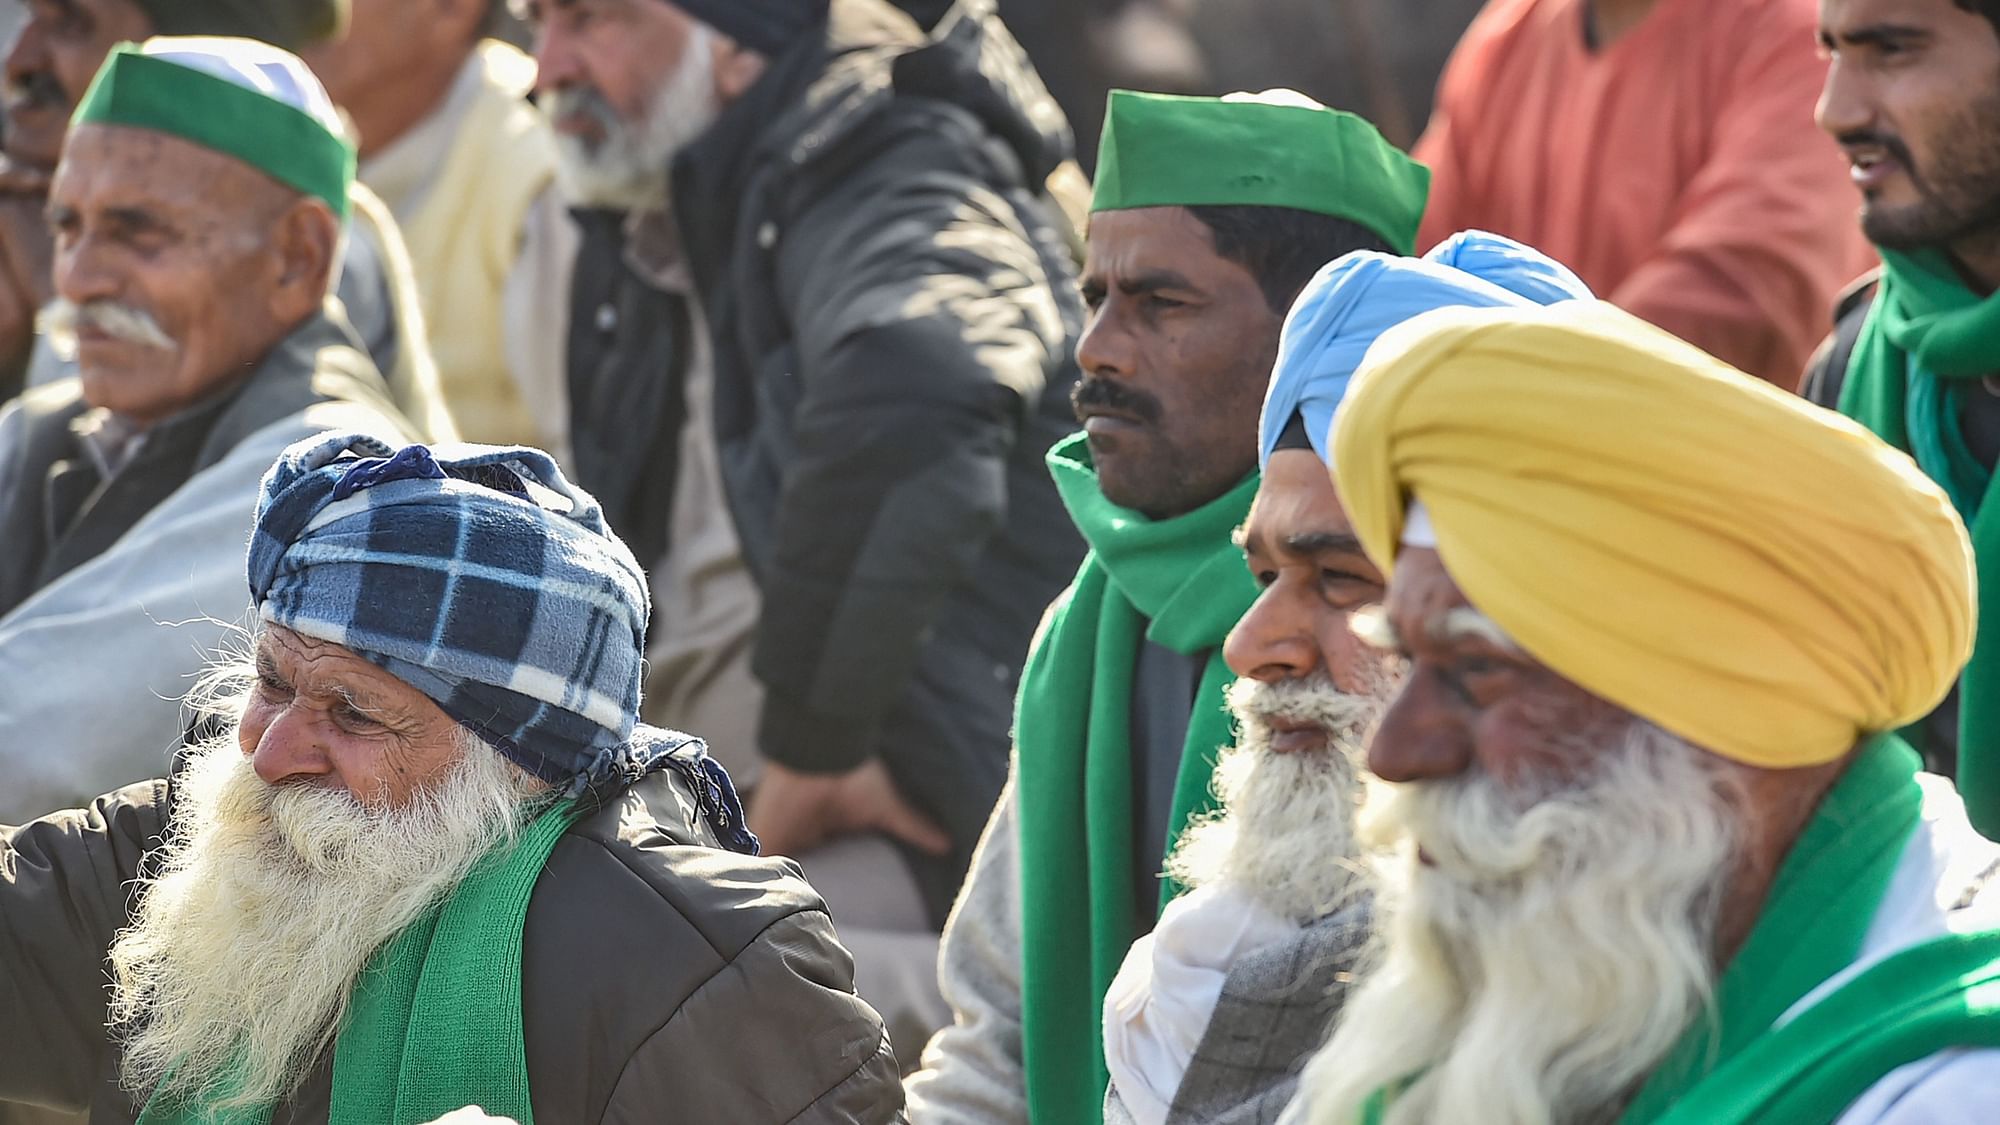 Farmers during their ongoing agitation against new farm laws, at Ghazipur border, in New Delhi. Image used for representation purpose.